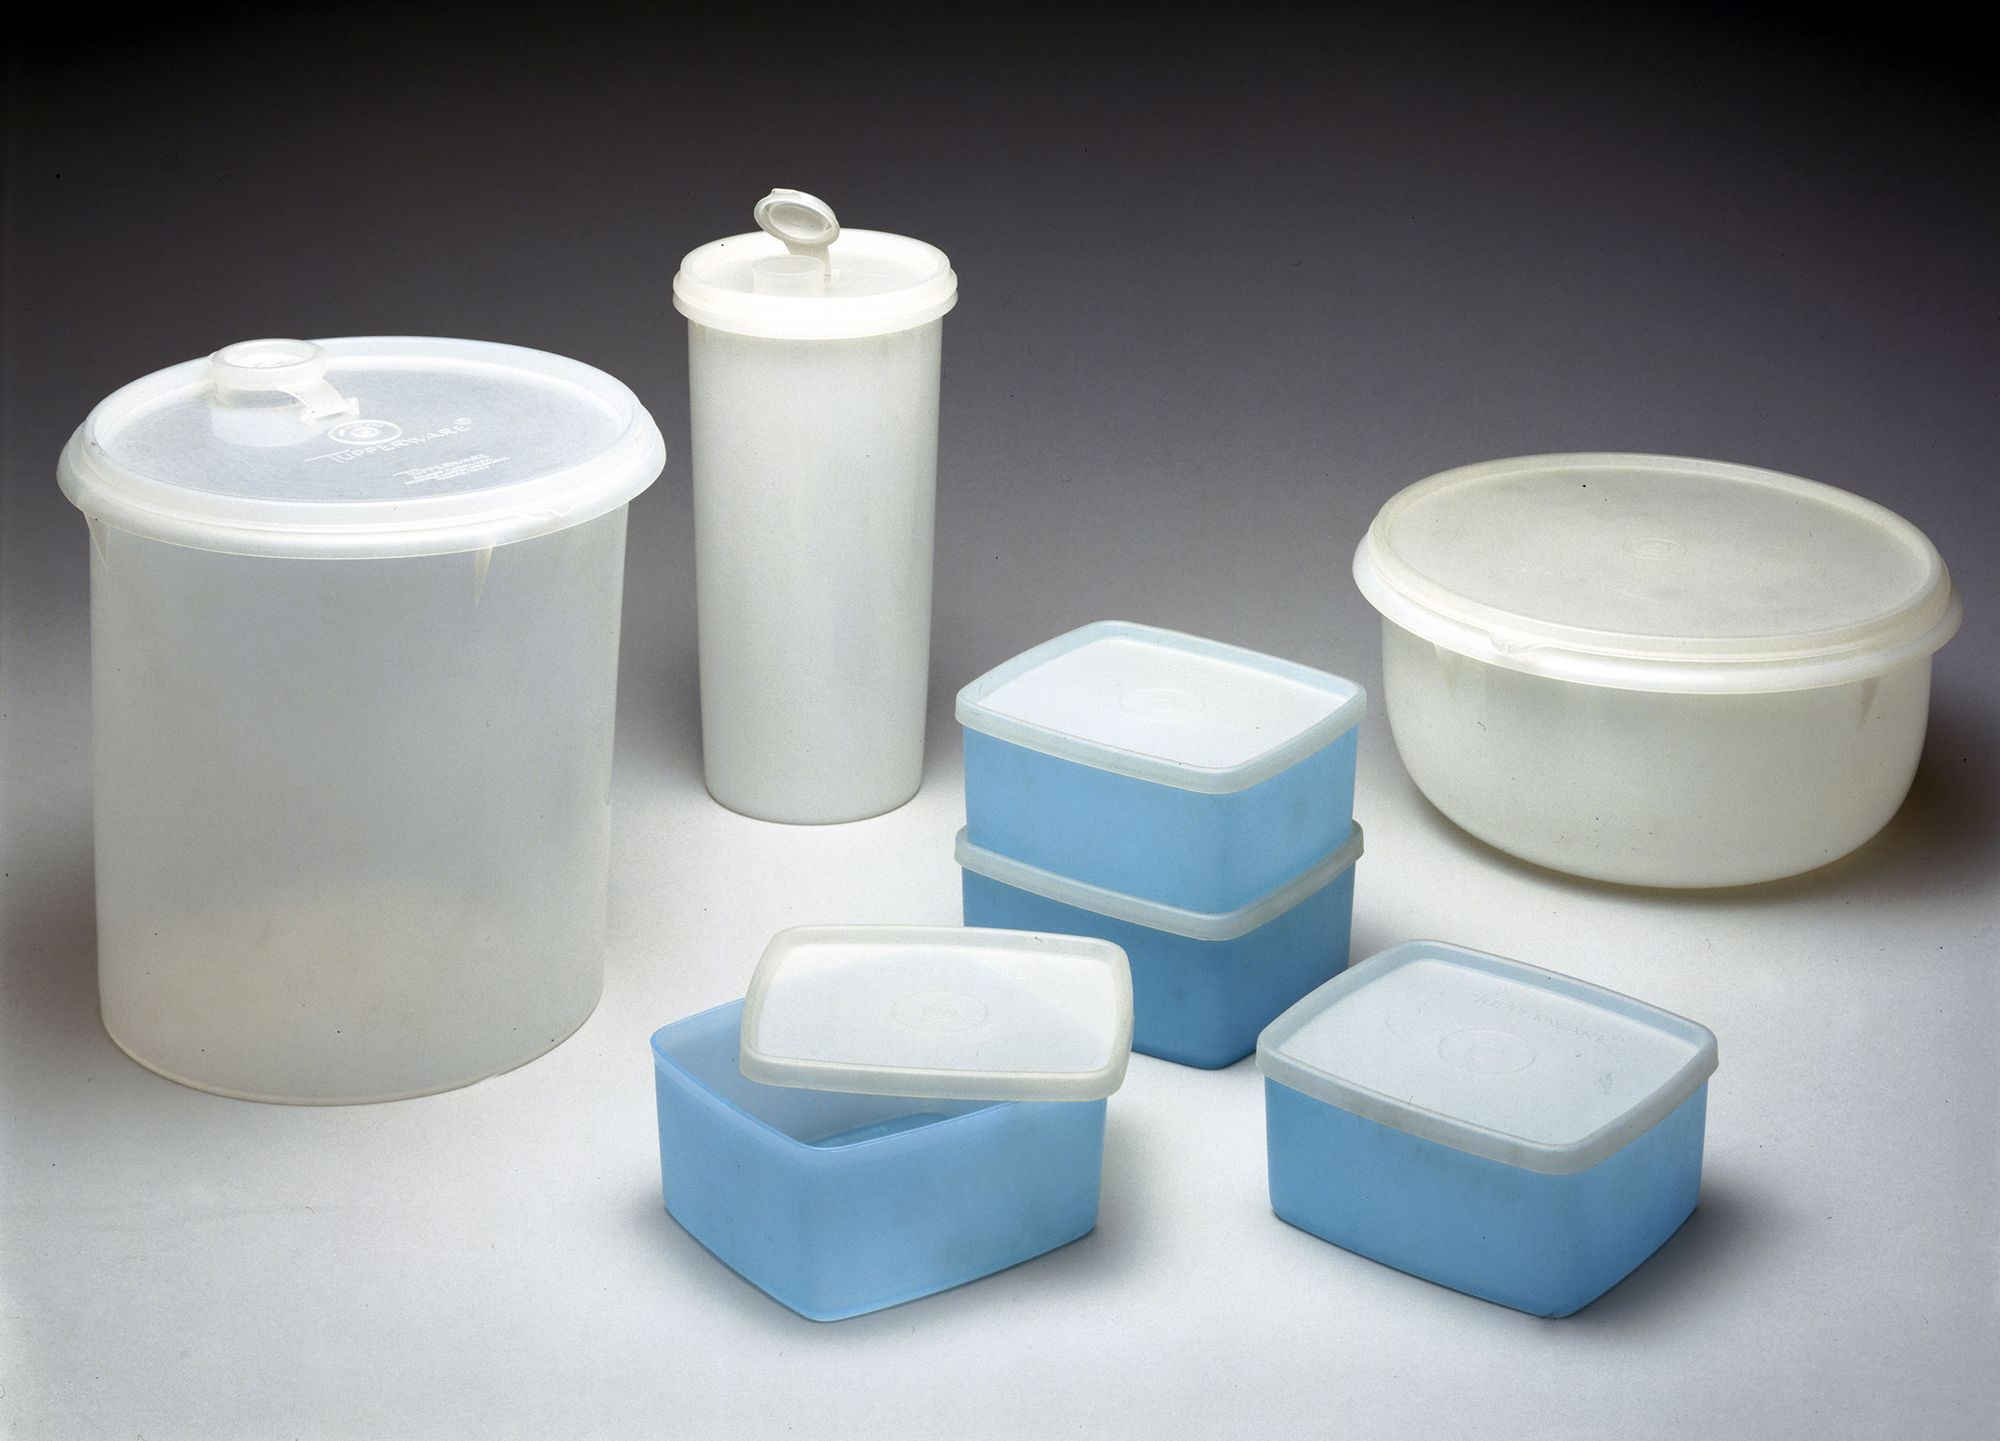 Tupperware: How a plastic bowl with a 'burping seal' gave women a